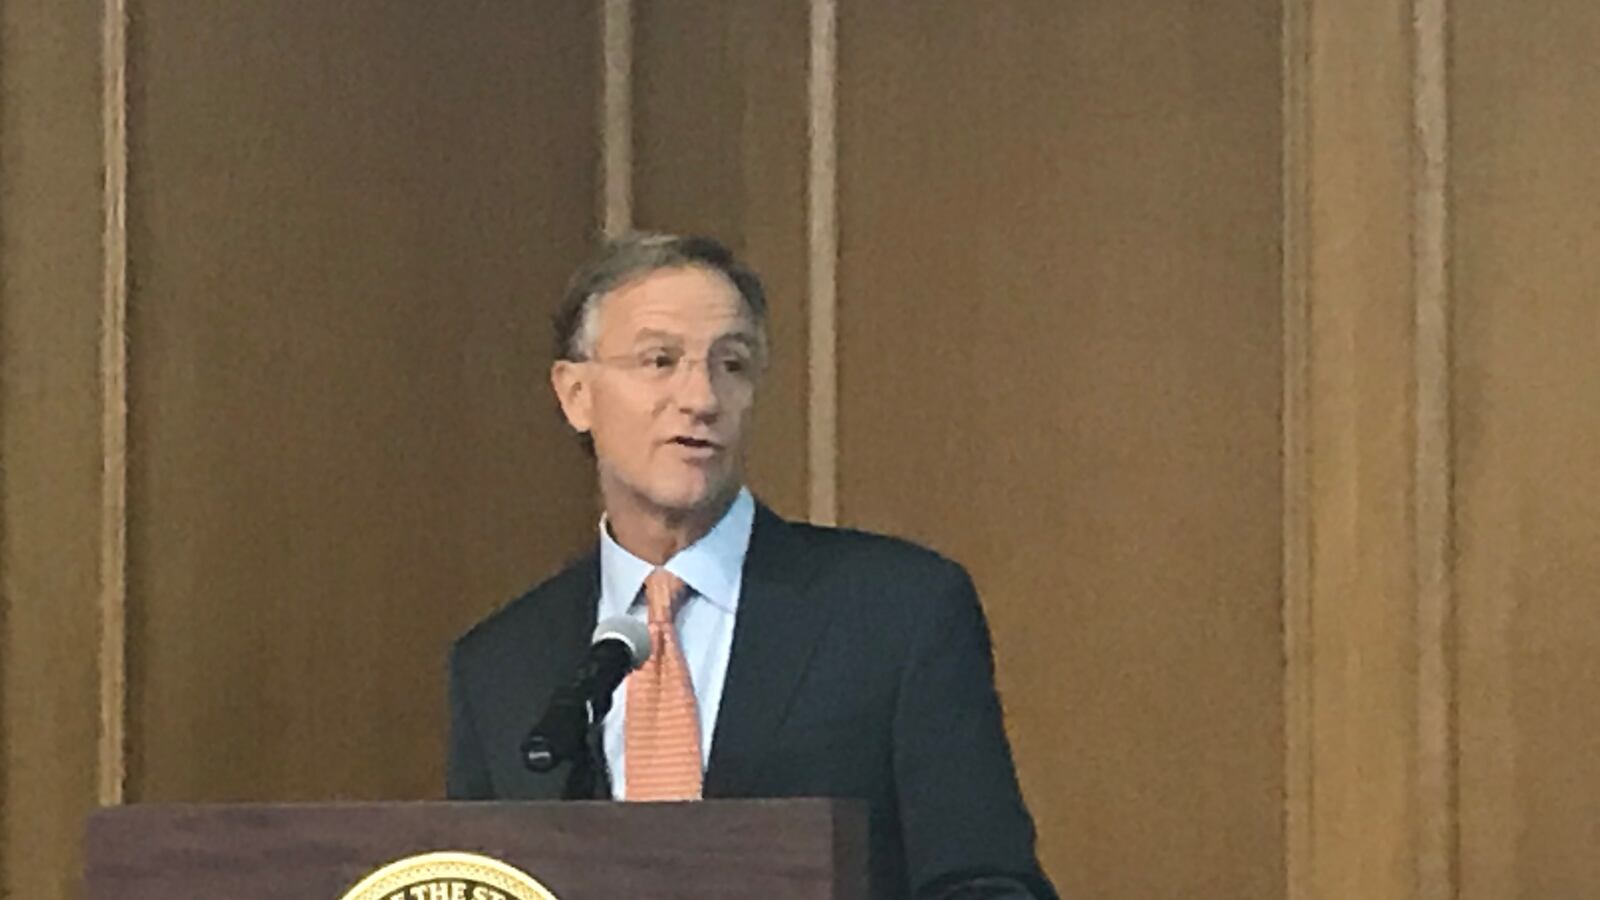 Gov. Bill Haslam gives brief remarks to reporters on Monday in advance of his annual State of the State address.